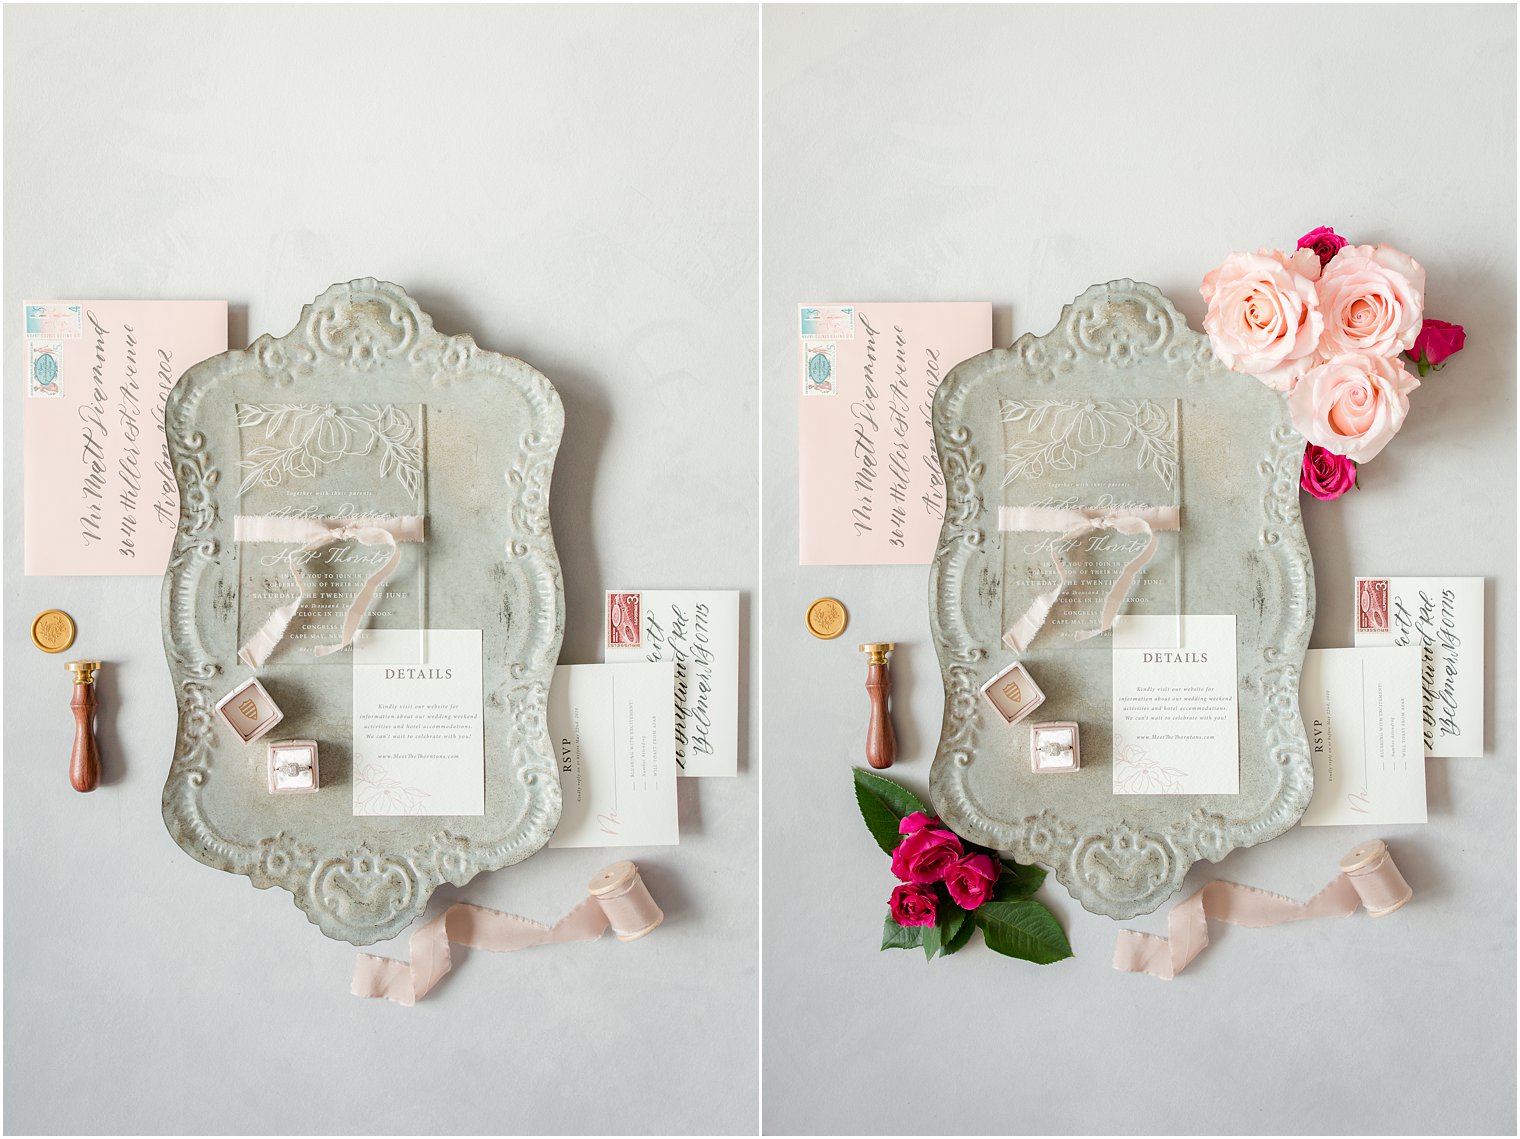 Wedding invitation by Lace and Belle